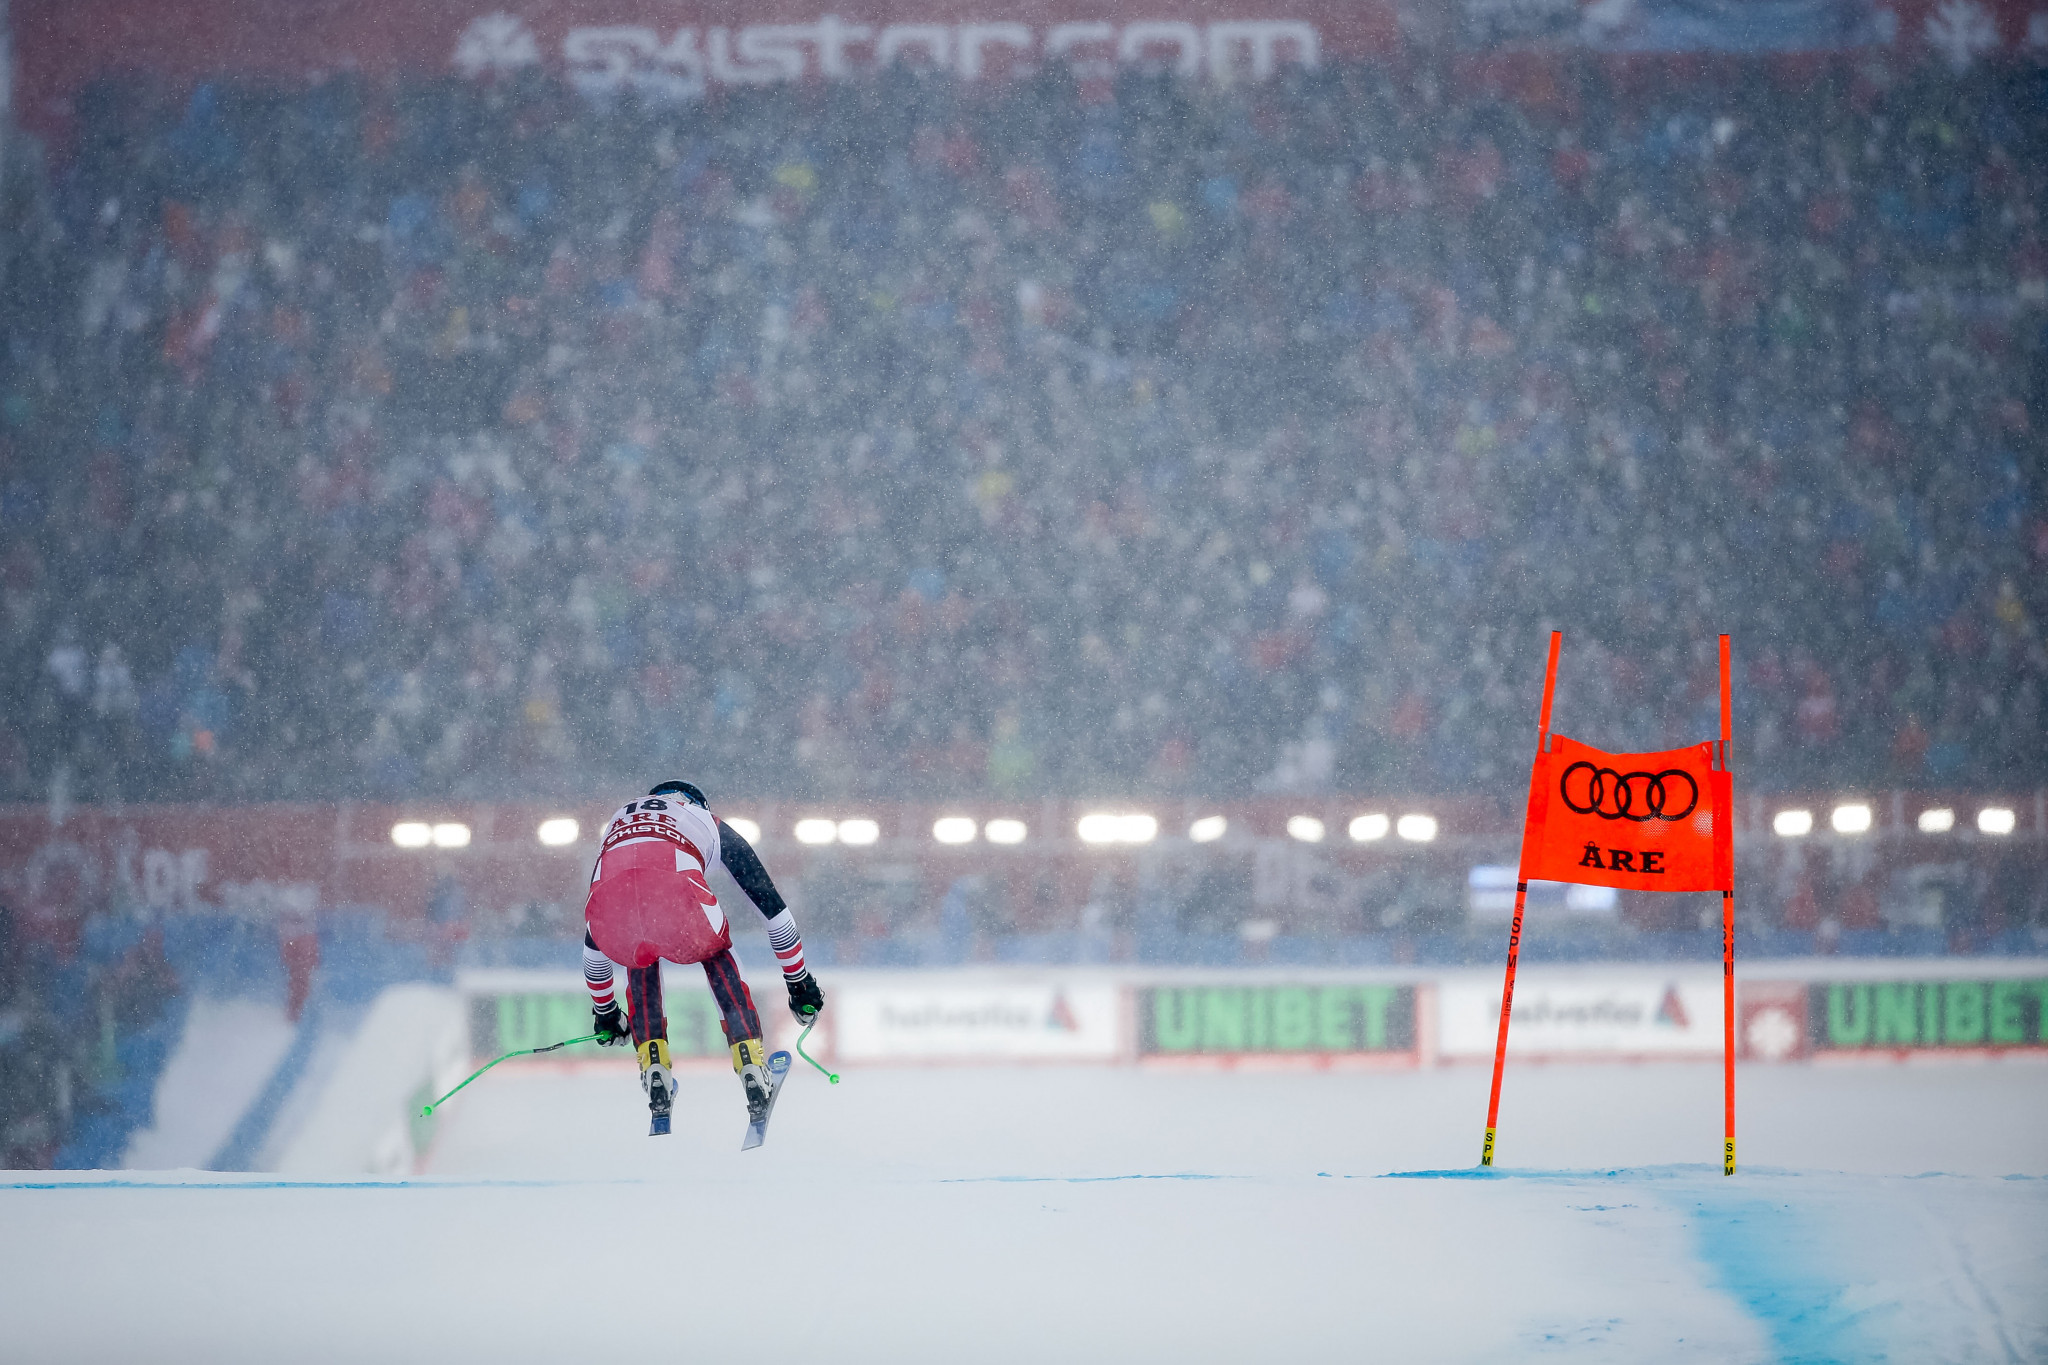 A large crowd was present at the bottom of the course to greet the skiers ©Getty Images